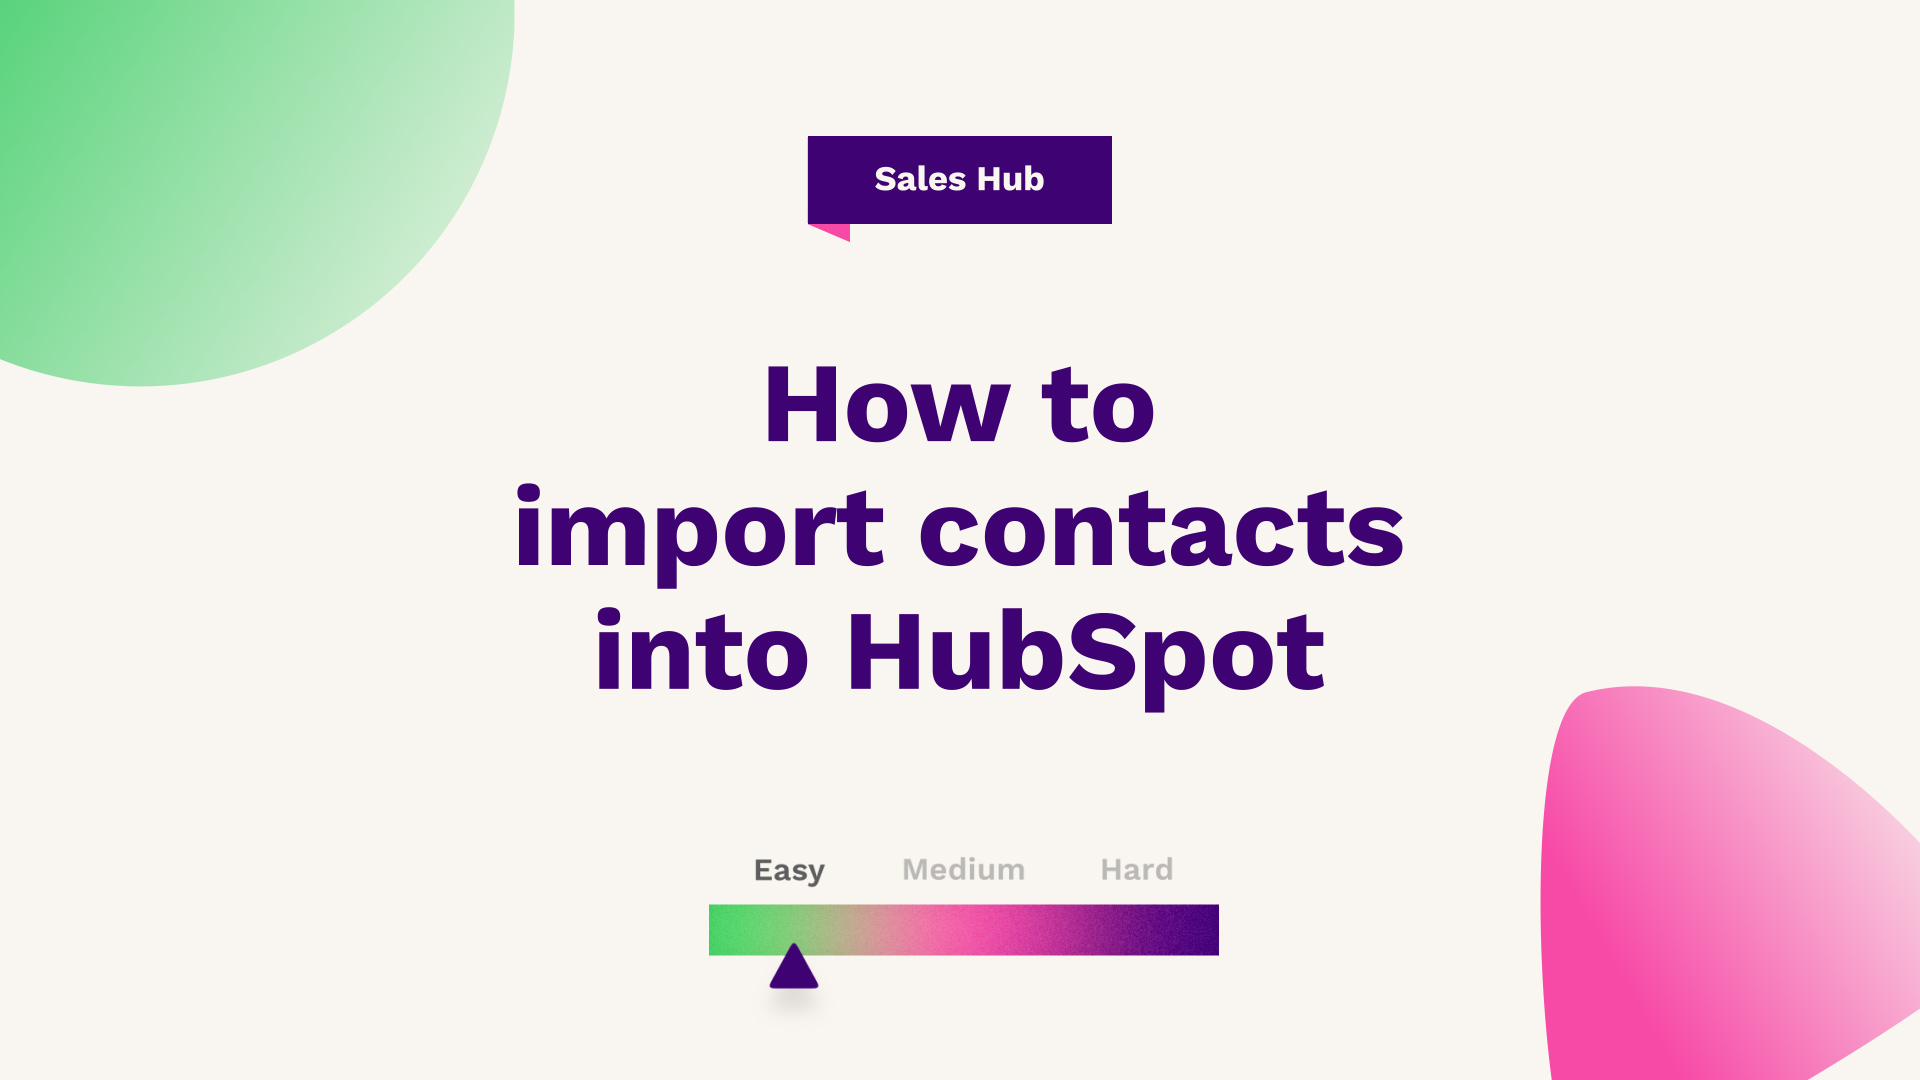 How to import contacts into HubSpot